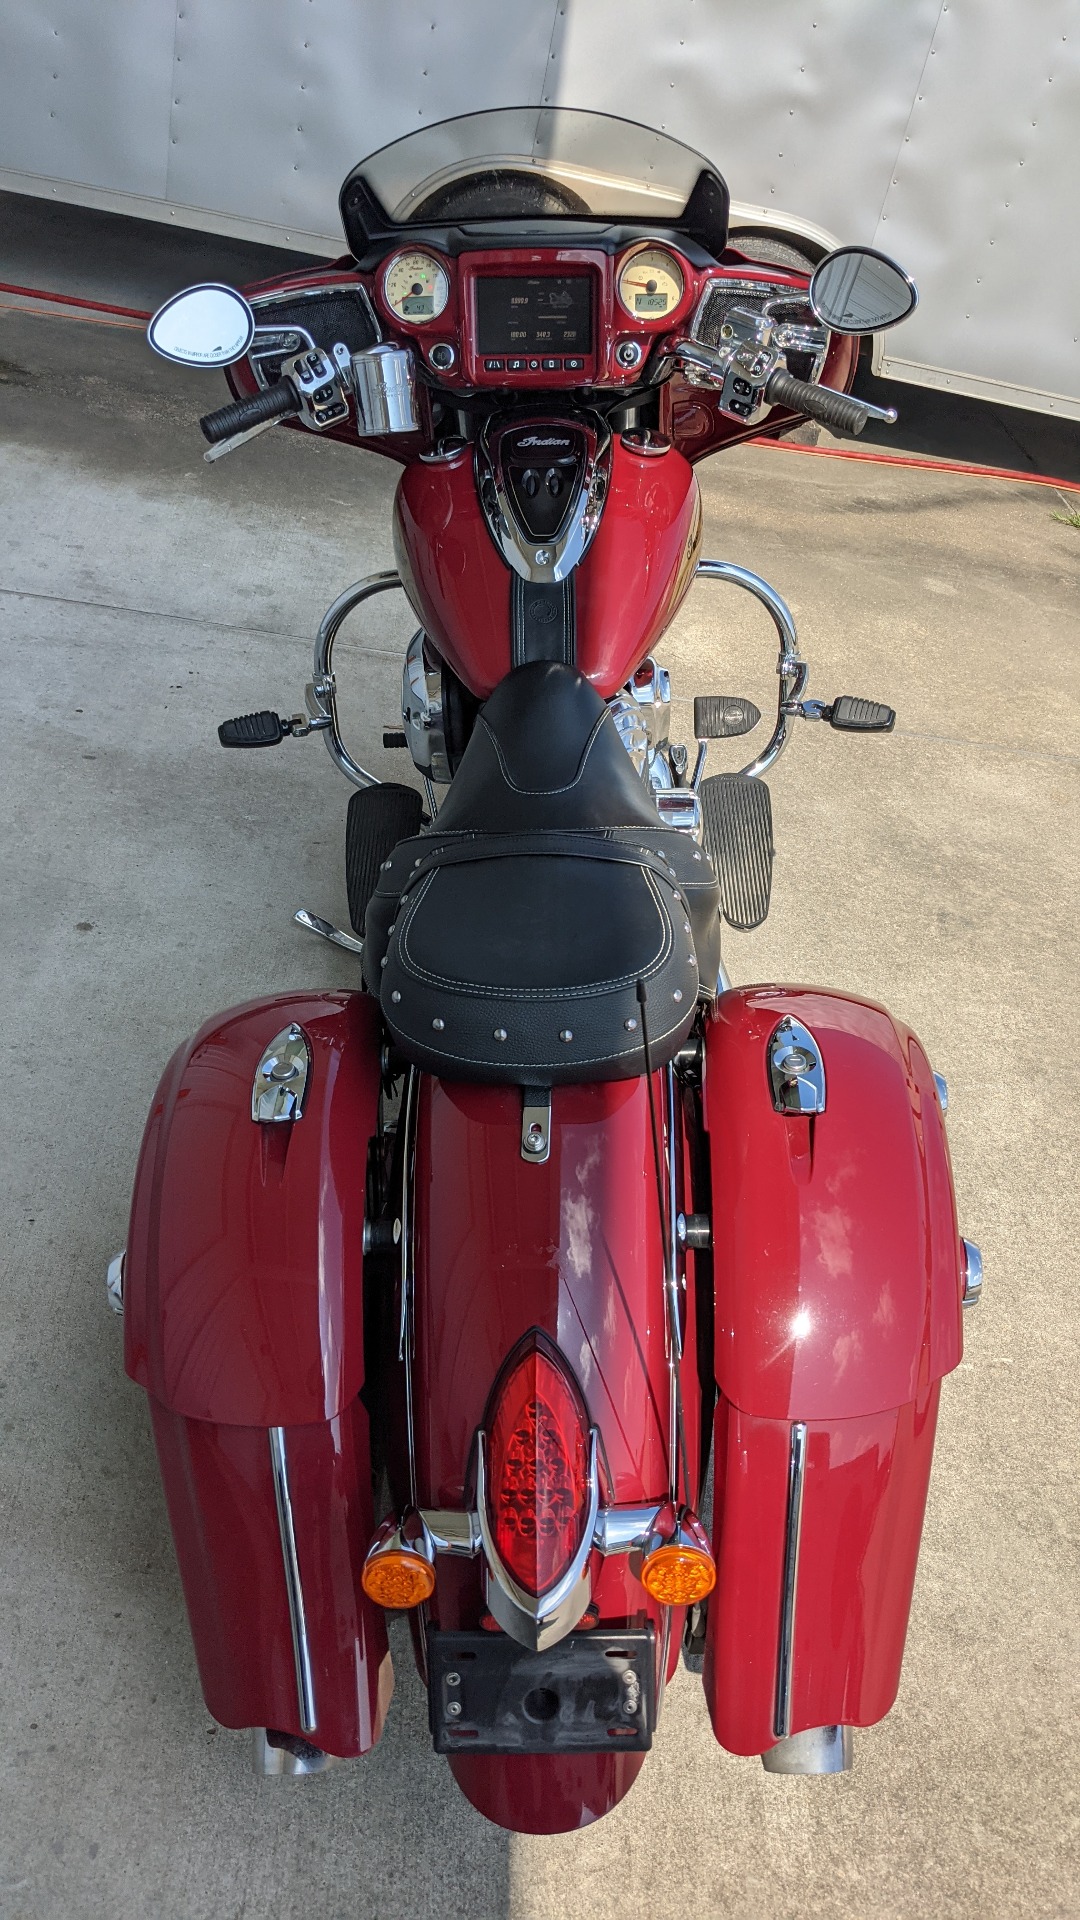 2018 Indian Chieftain Classic for sale near me - Photo 12